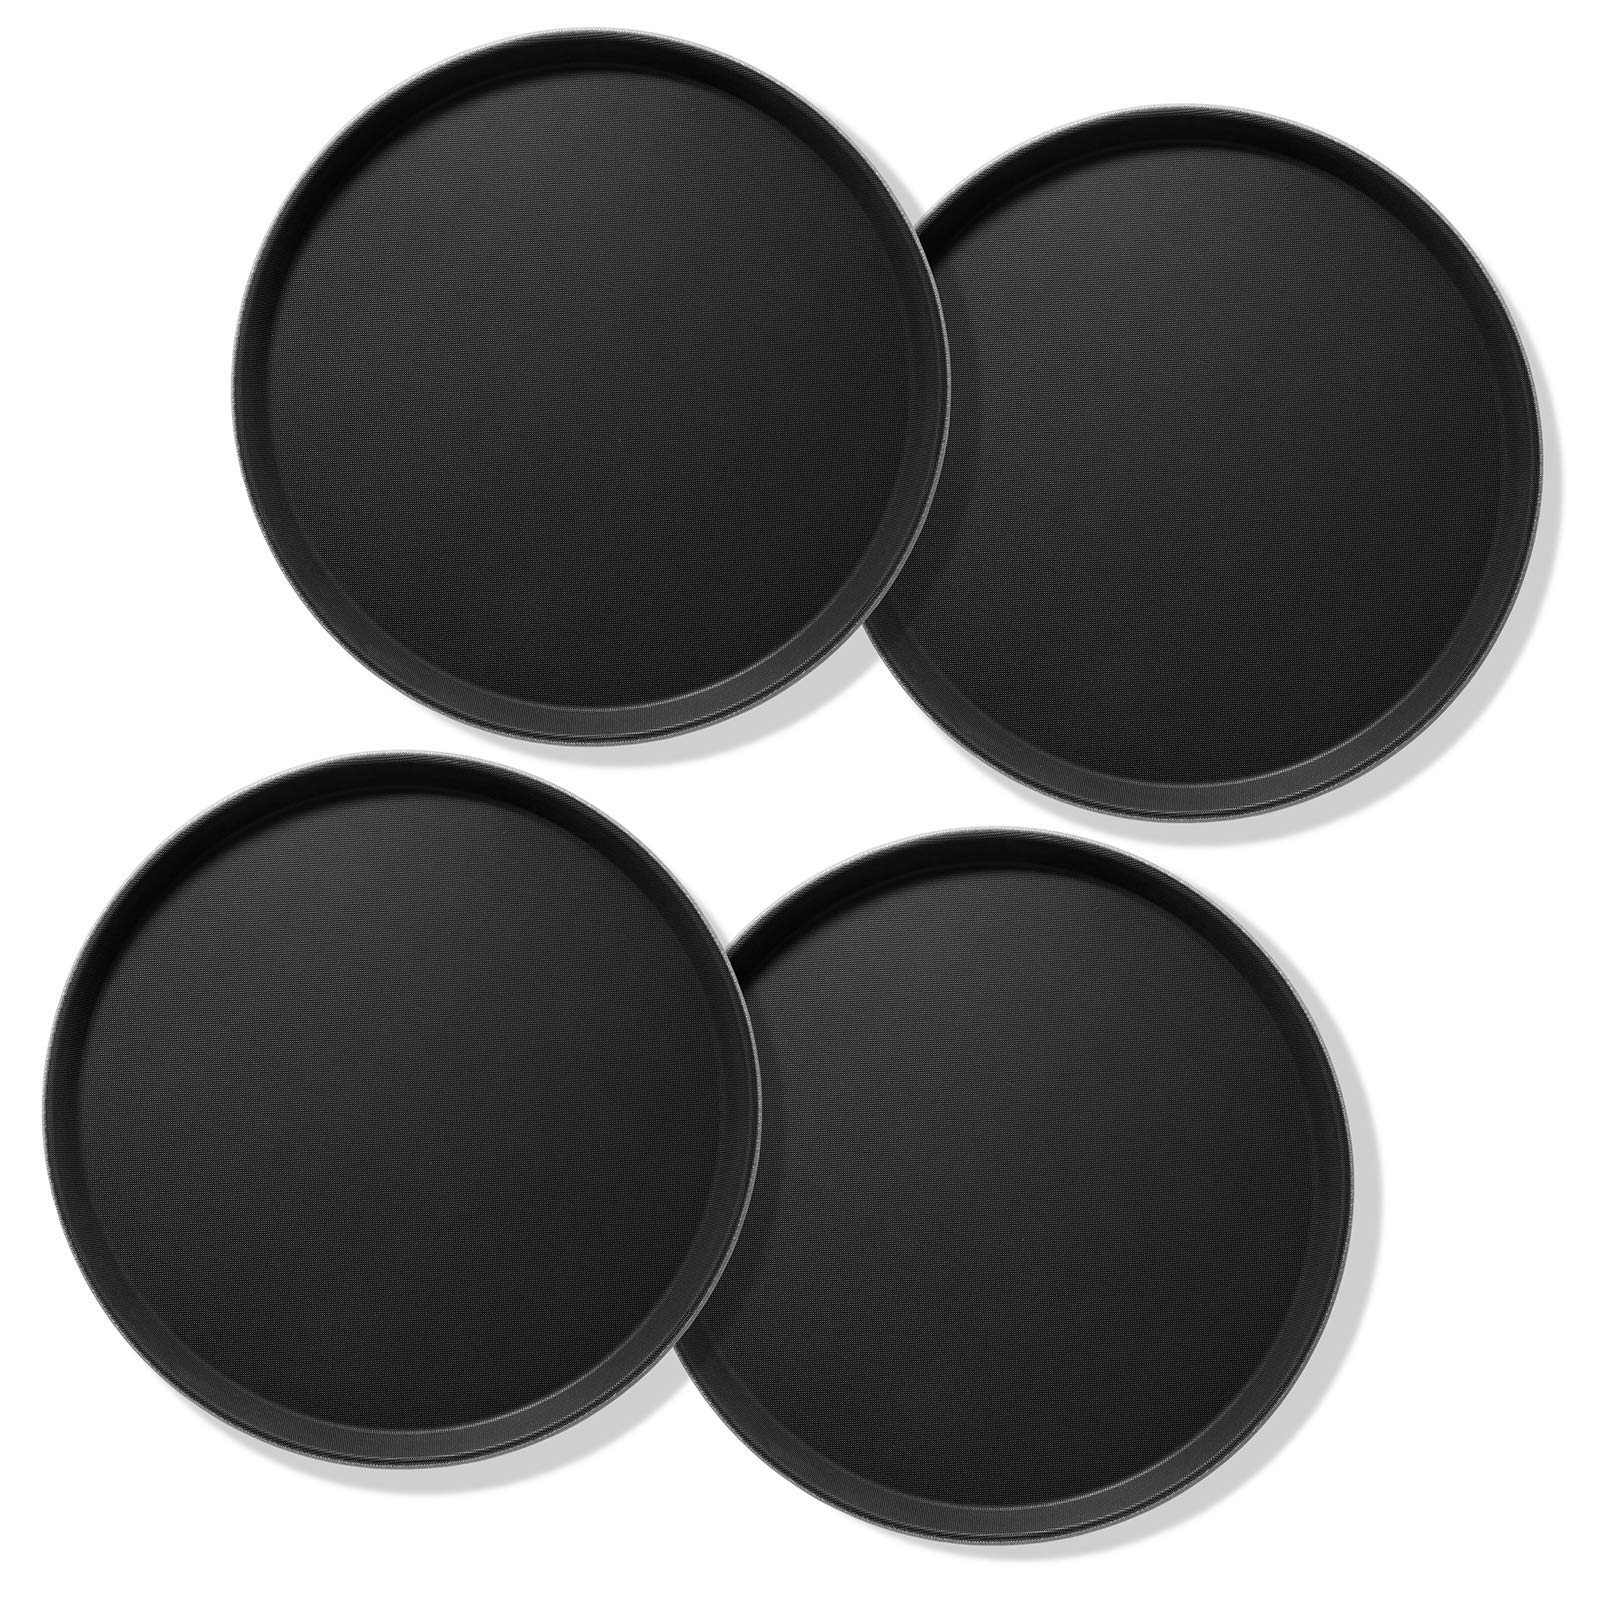 Jubilee (Set of 4) 16" Round Restaurant Serving Trays, Black - NSF Certified Non-Skid Food Service Tray